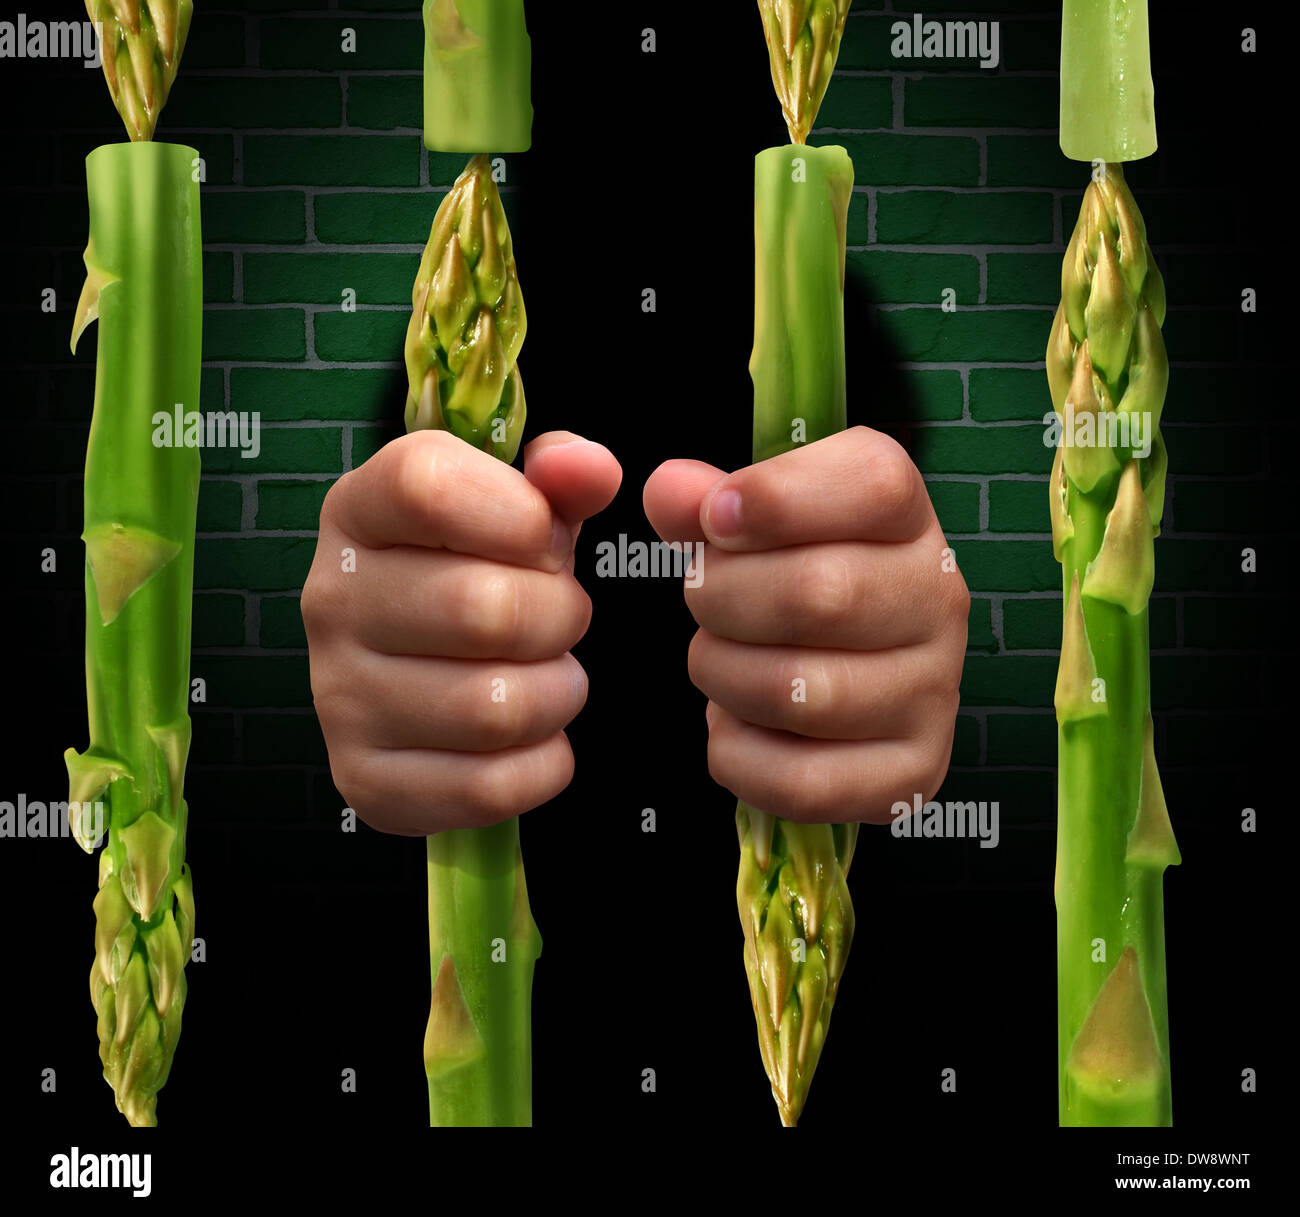 Restricted diet and calorie restriction food concept with prison bars made of asparagus vegetables and hands of a prisoner holding the jail as a dieting metaphor for the stress involved in healthy eating. Stock Photo